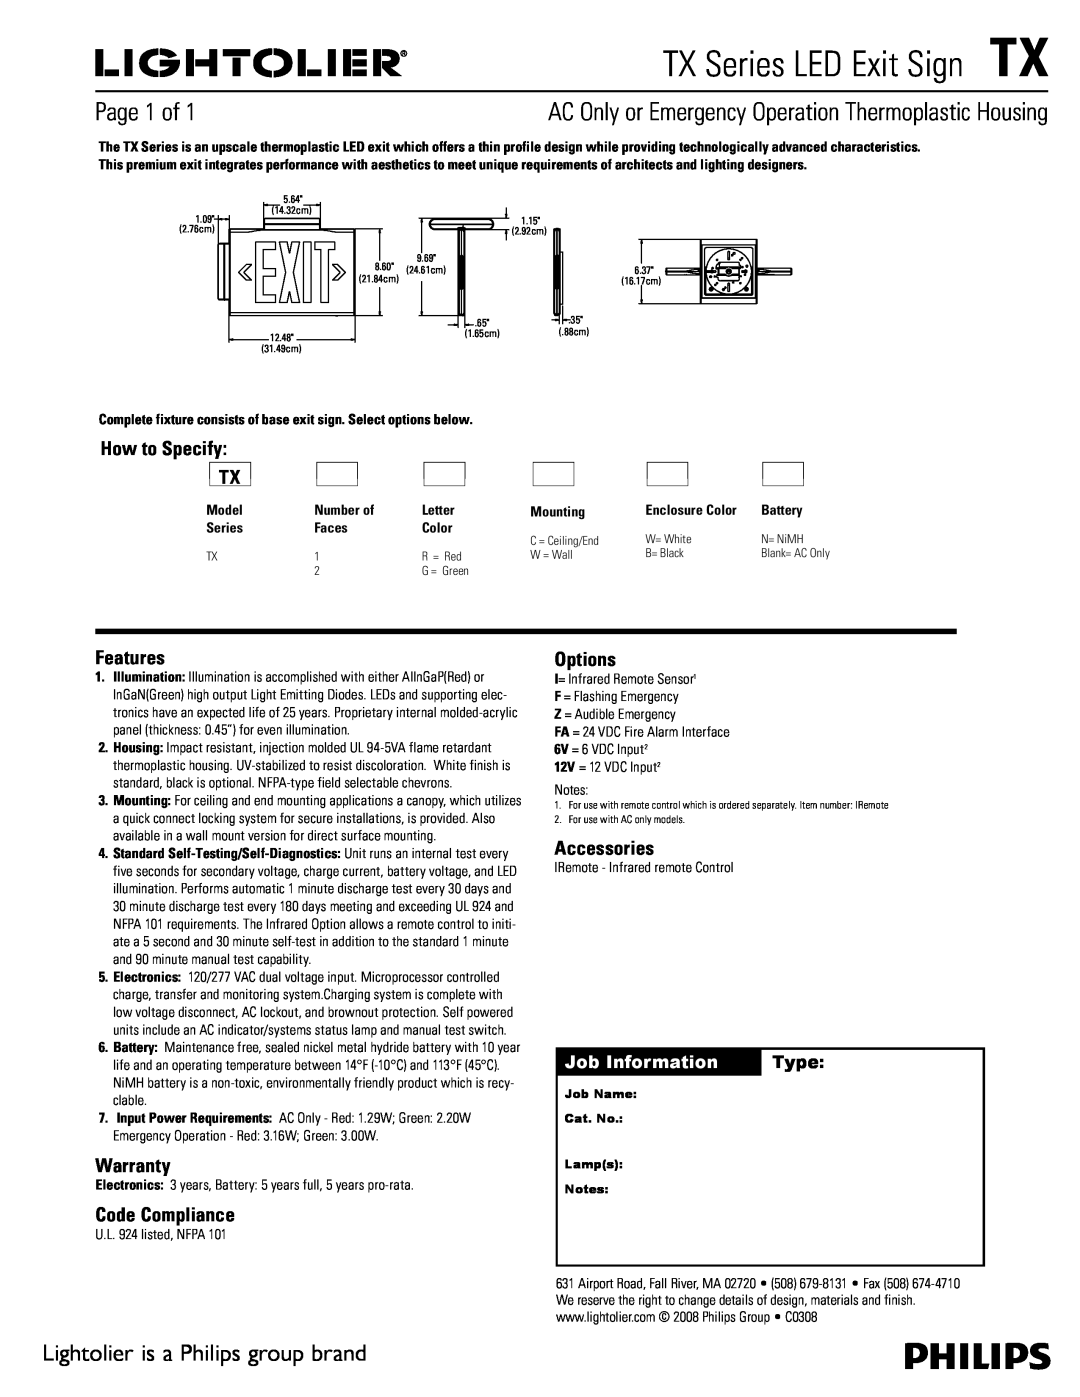 Lightolier warranty TX Series LED Exit SignTX, Page 1 of, Lightolier is a Philips group brand, How to Specify TX, Type 